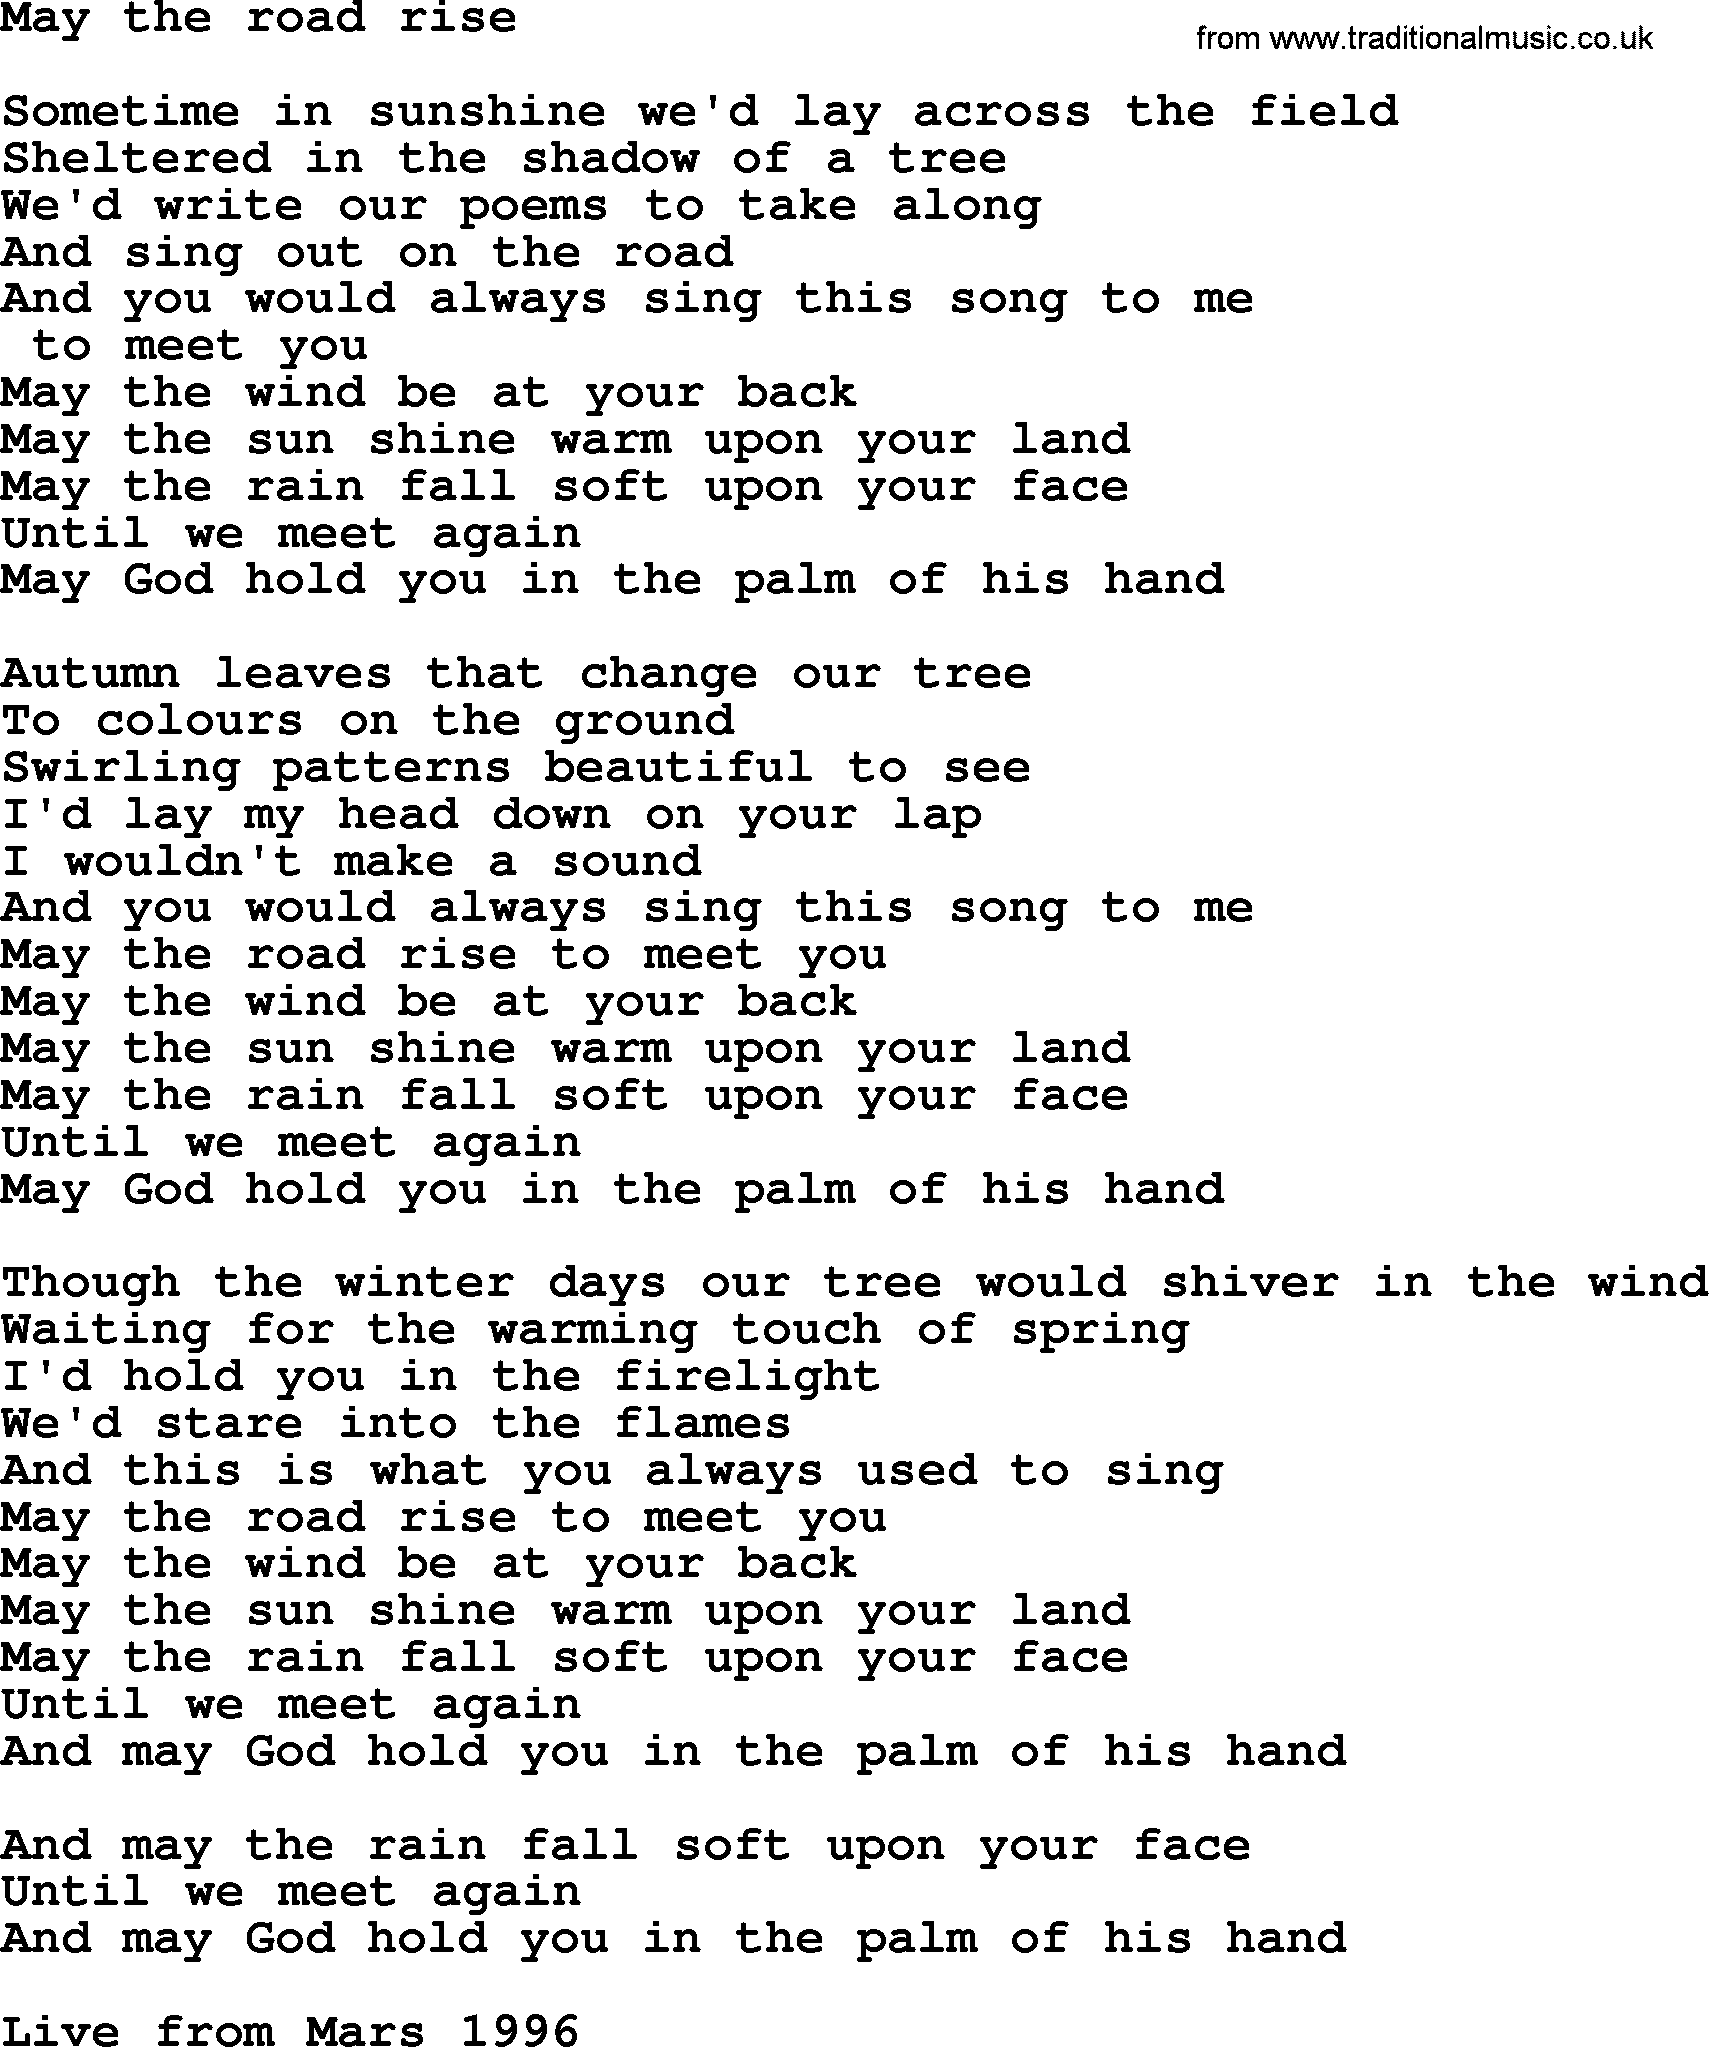 The Byrds song May The Road Rise, lyrics